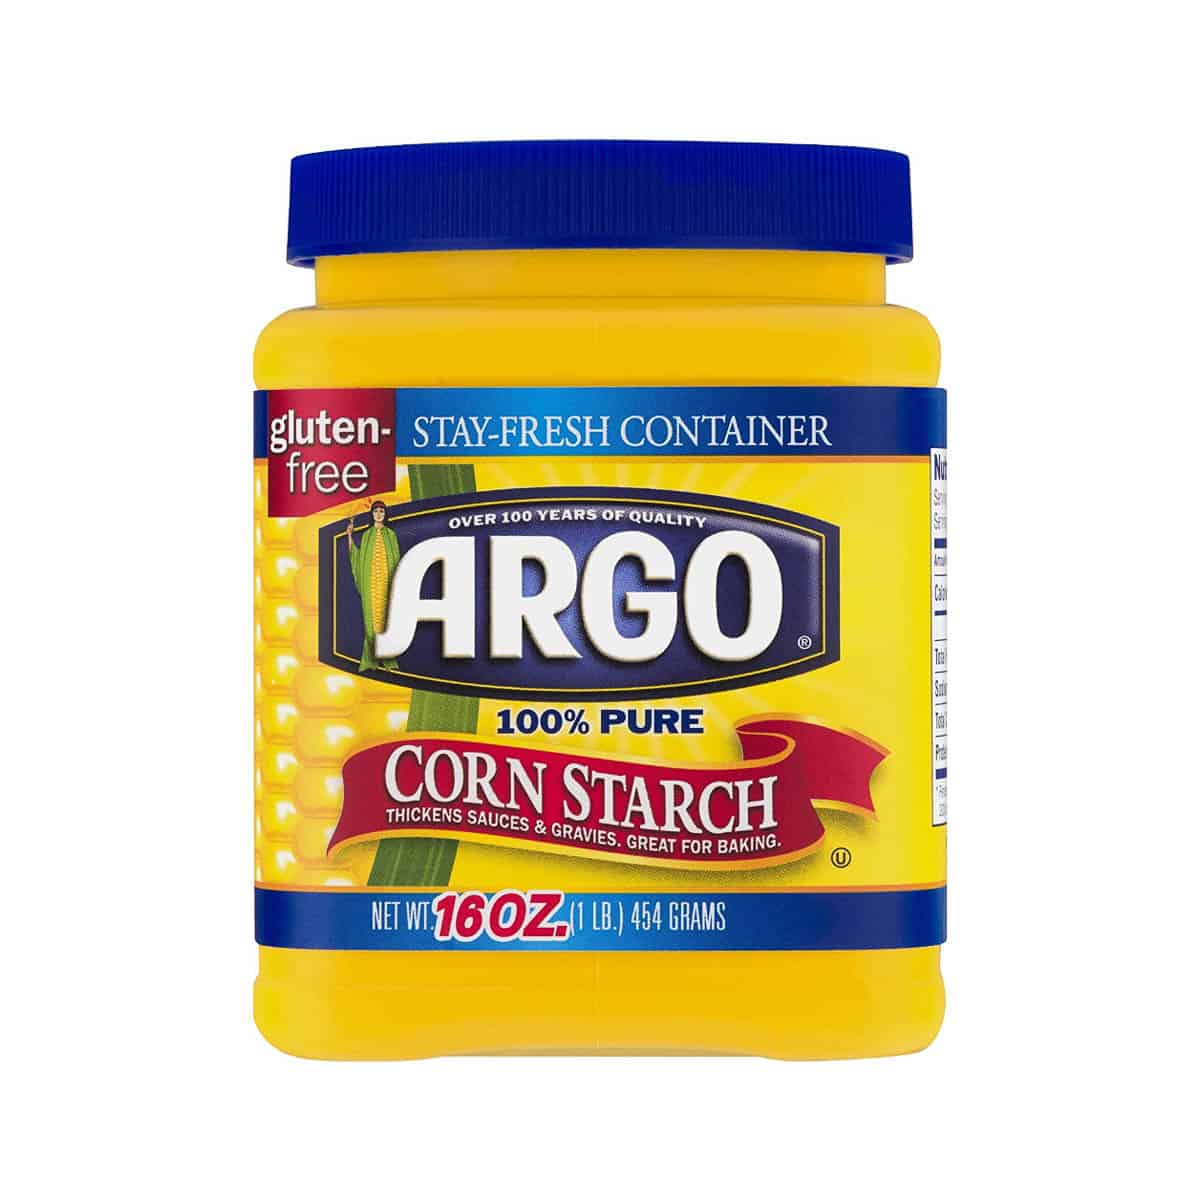 cornstarch package on a white background